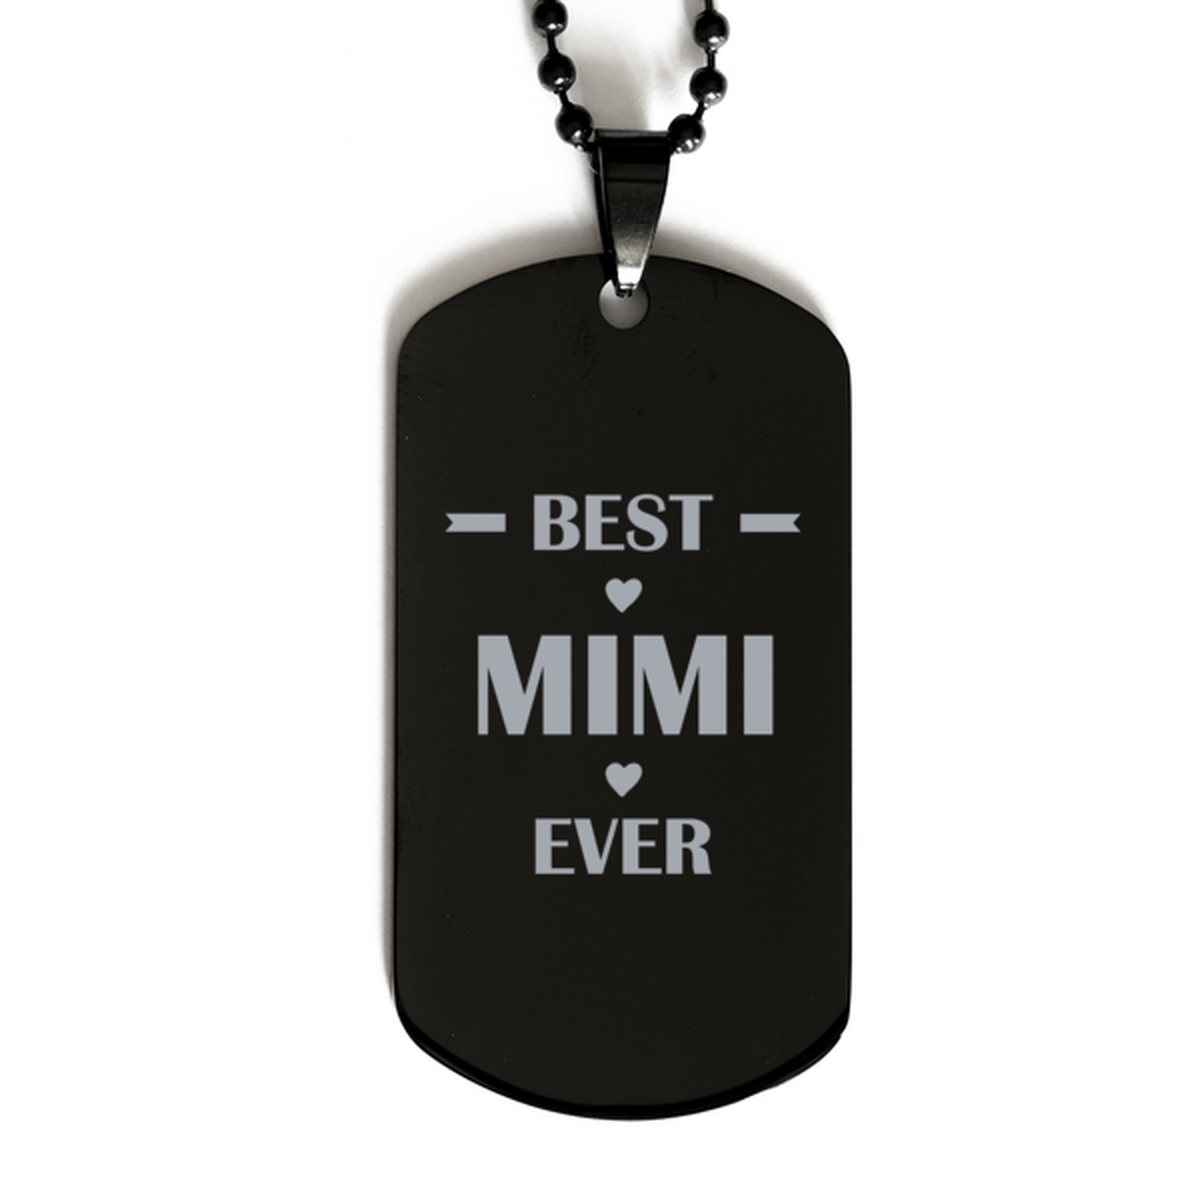 Best Mimi Ever Mimi Gifts, Funny Black Dog Tag For Mimi, Birthday Family Presents Engraved Necklace For Women